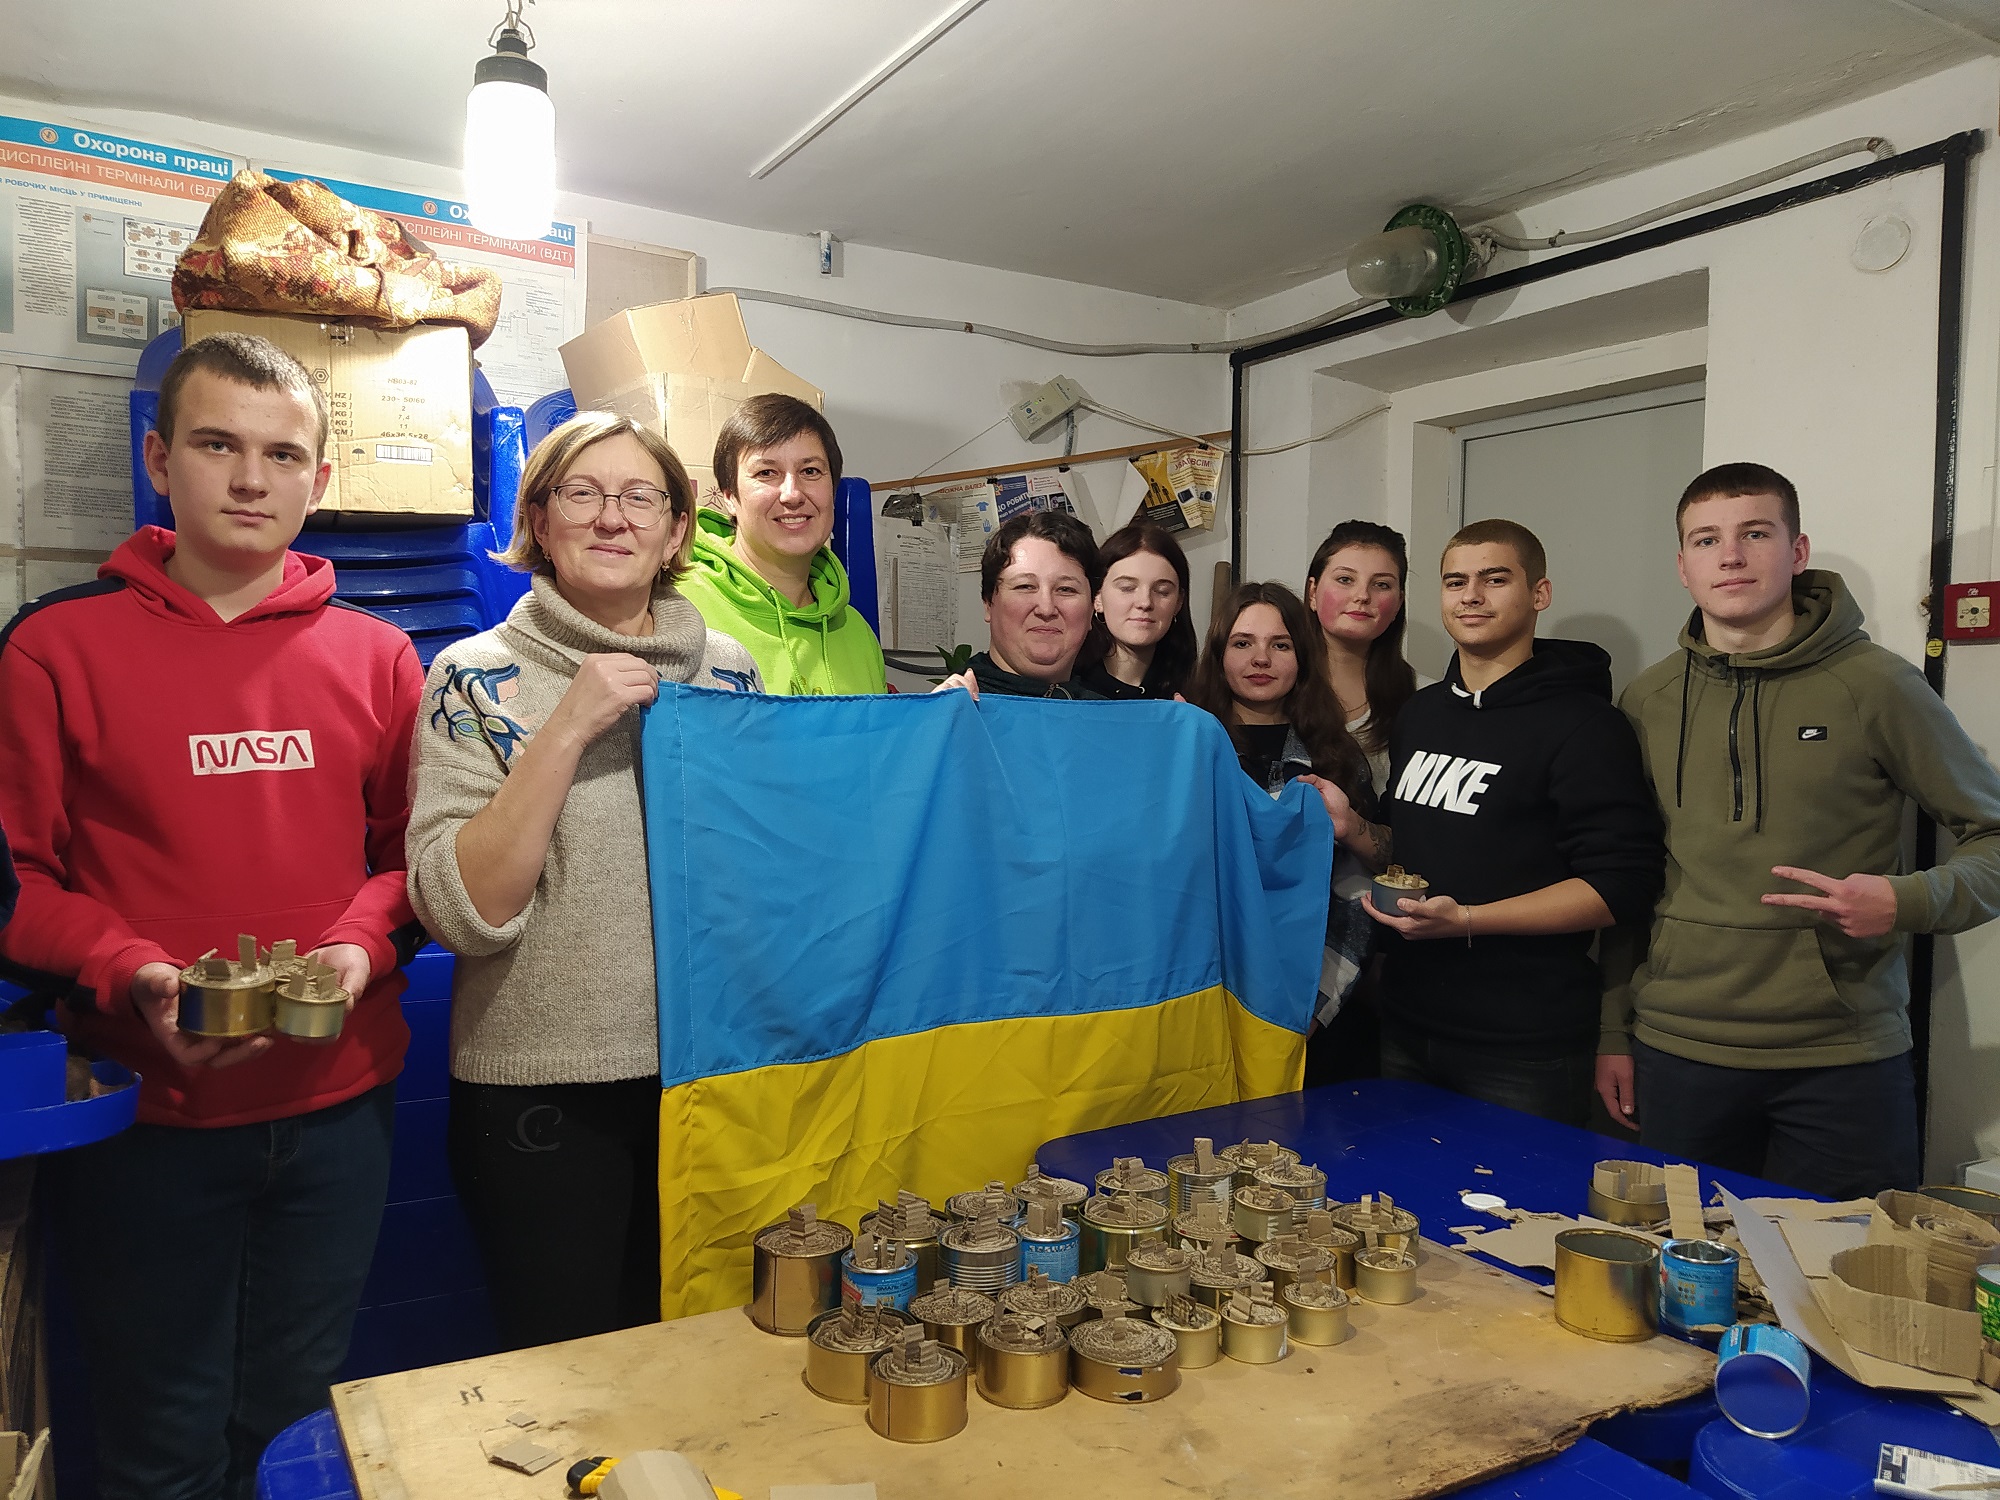 Workshop on making trench candles